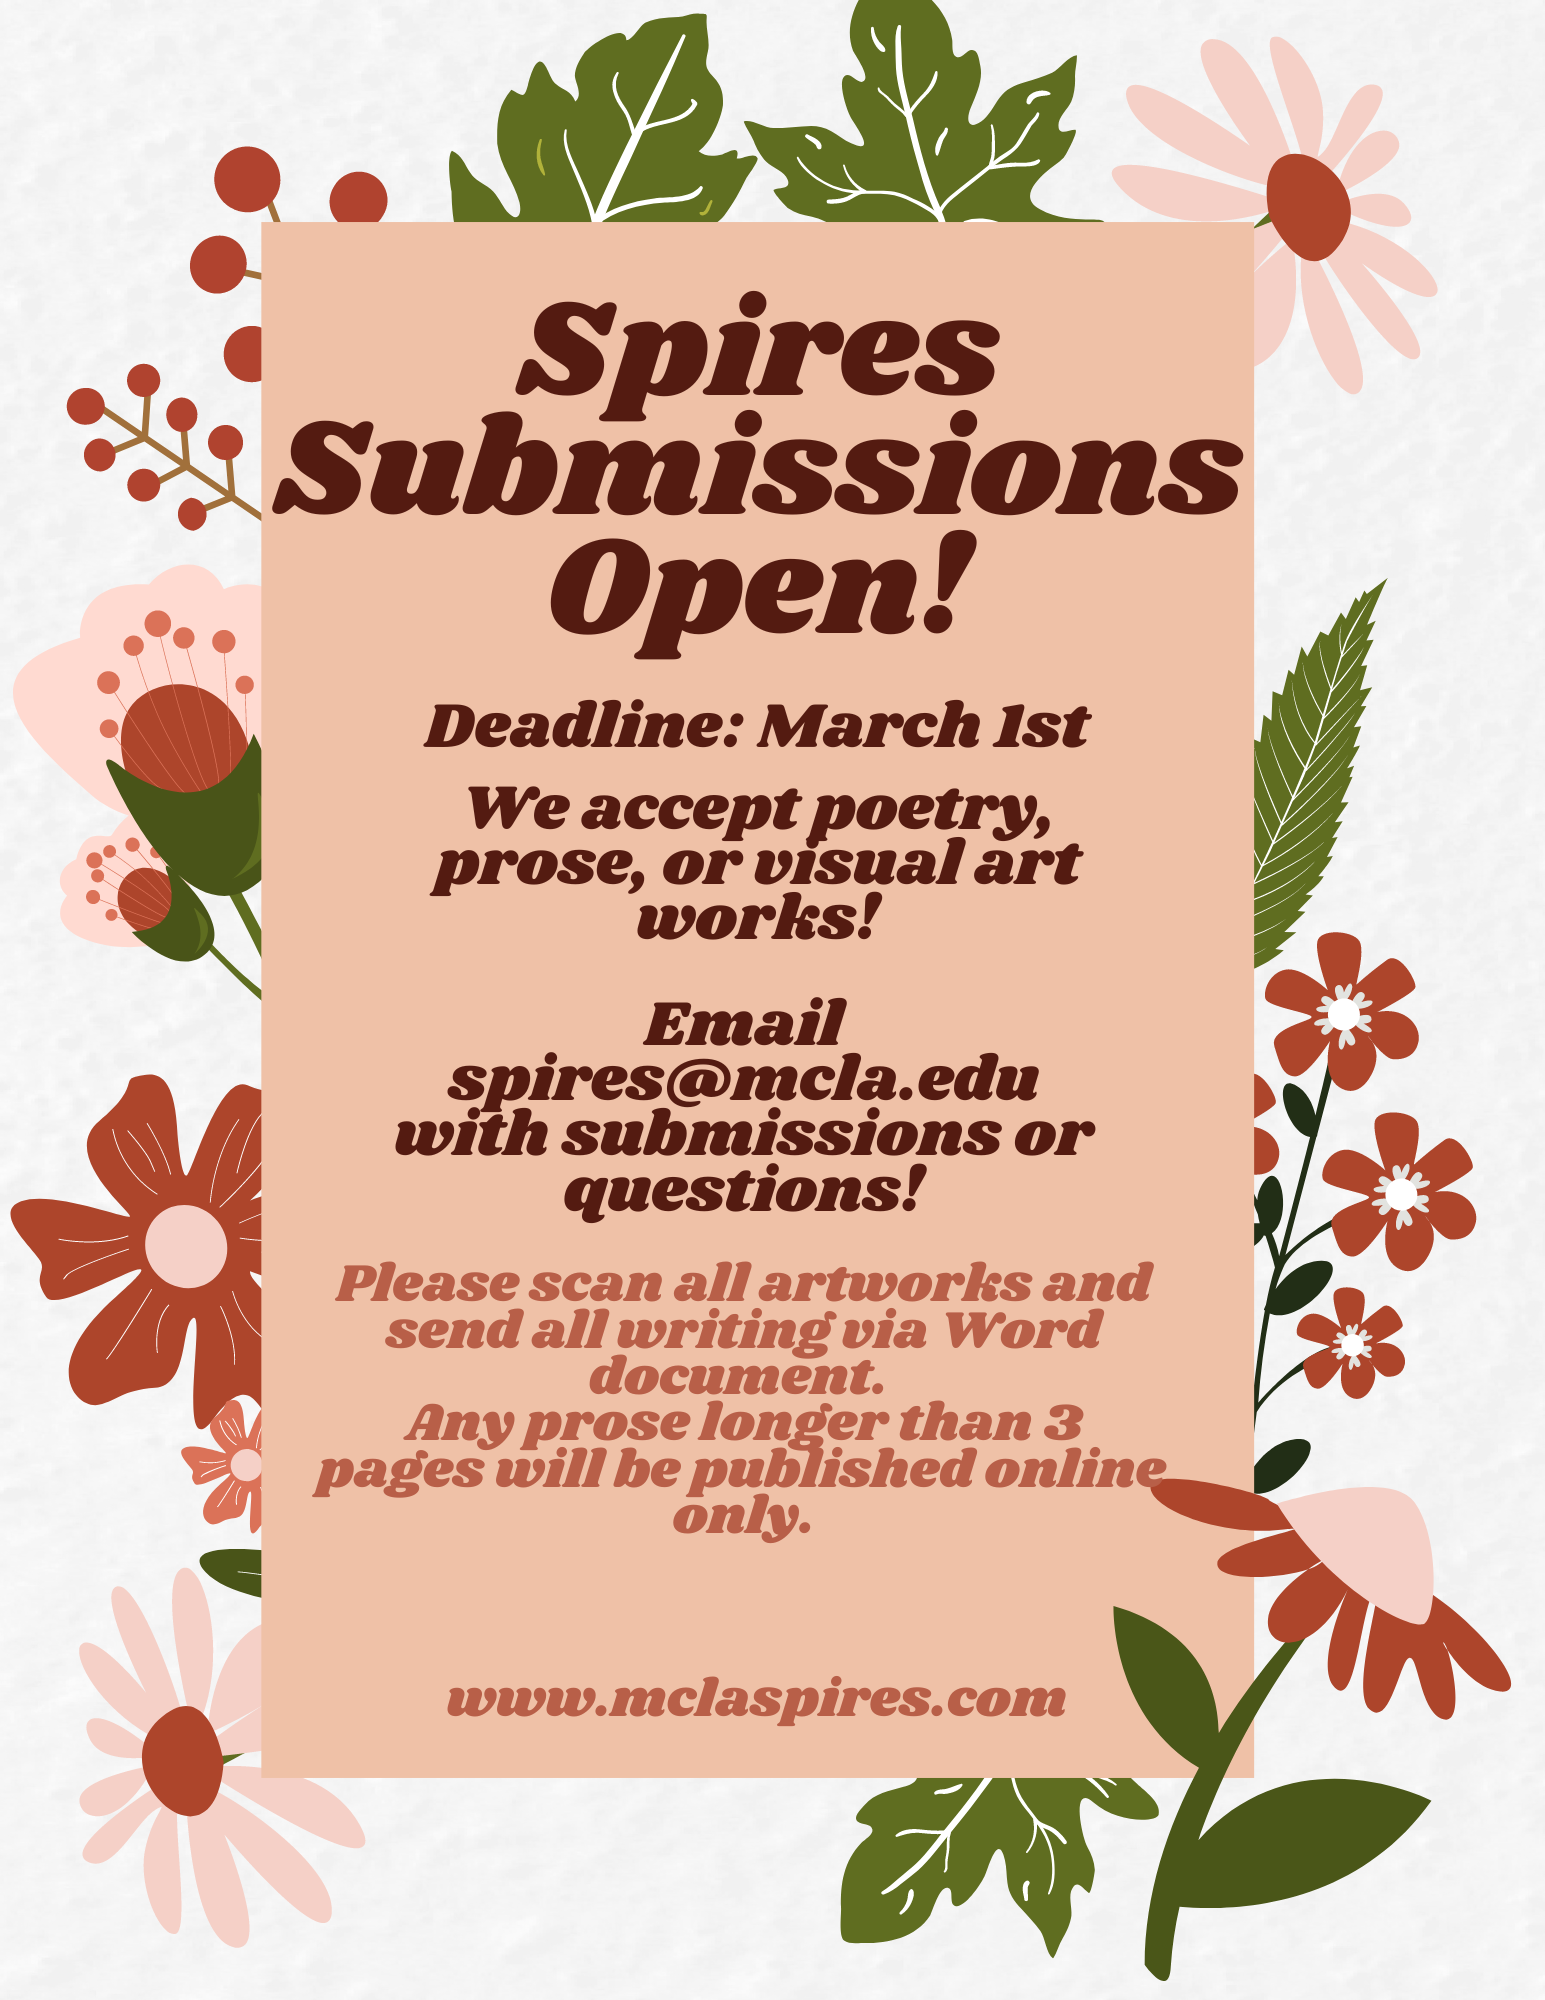 Spires Submissions Open!